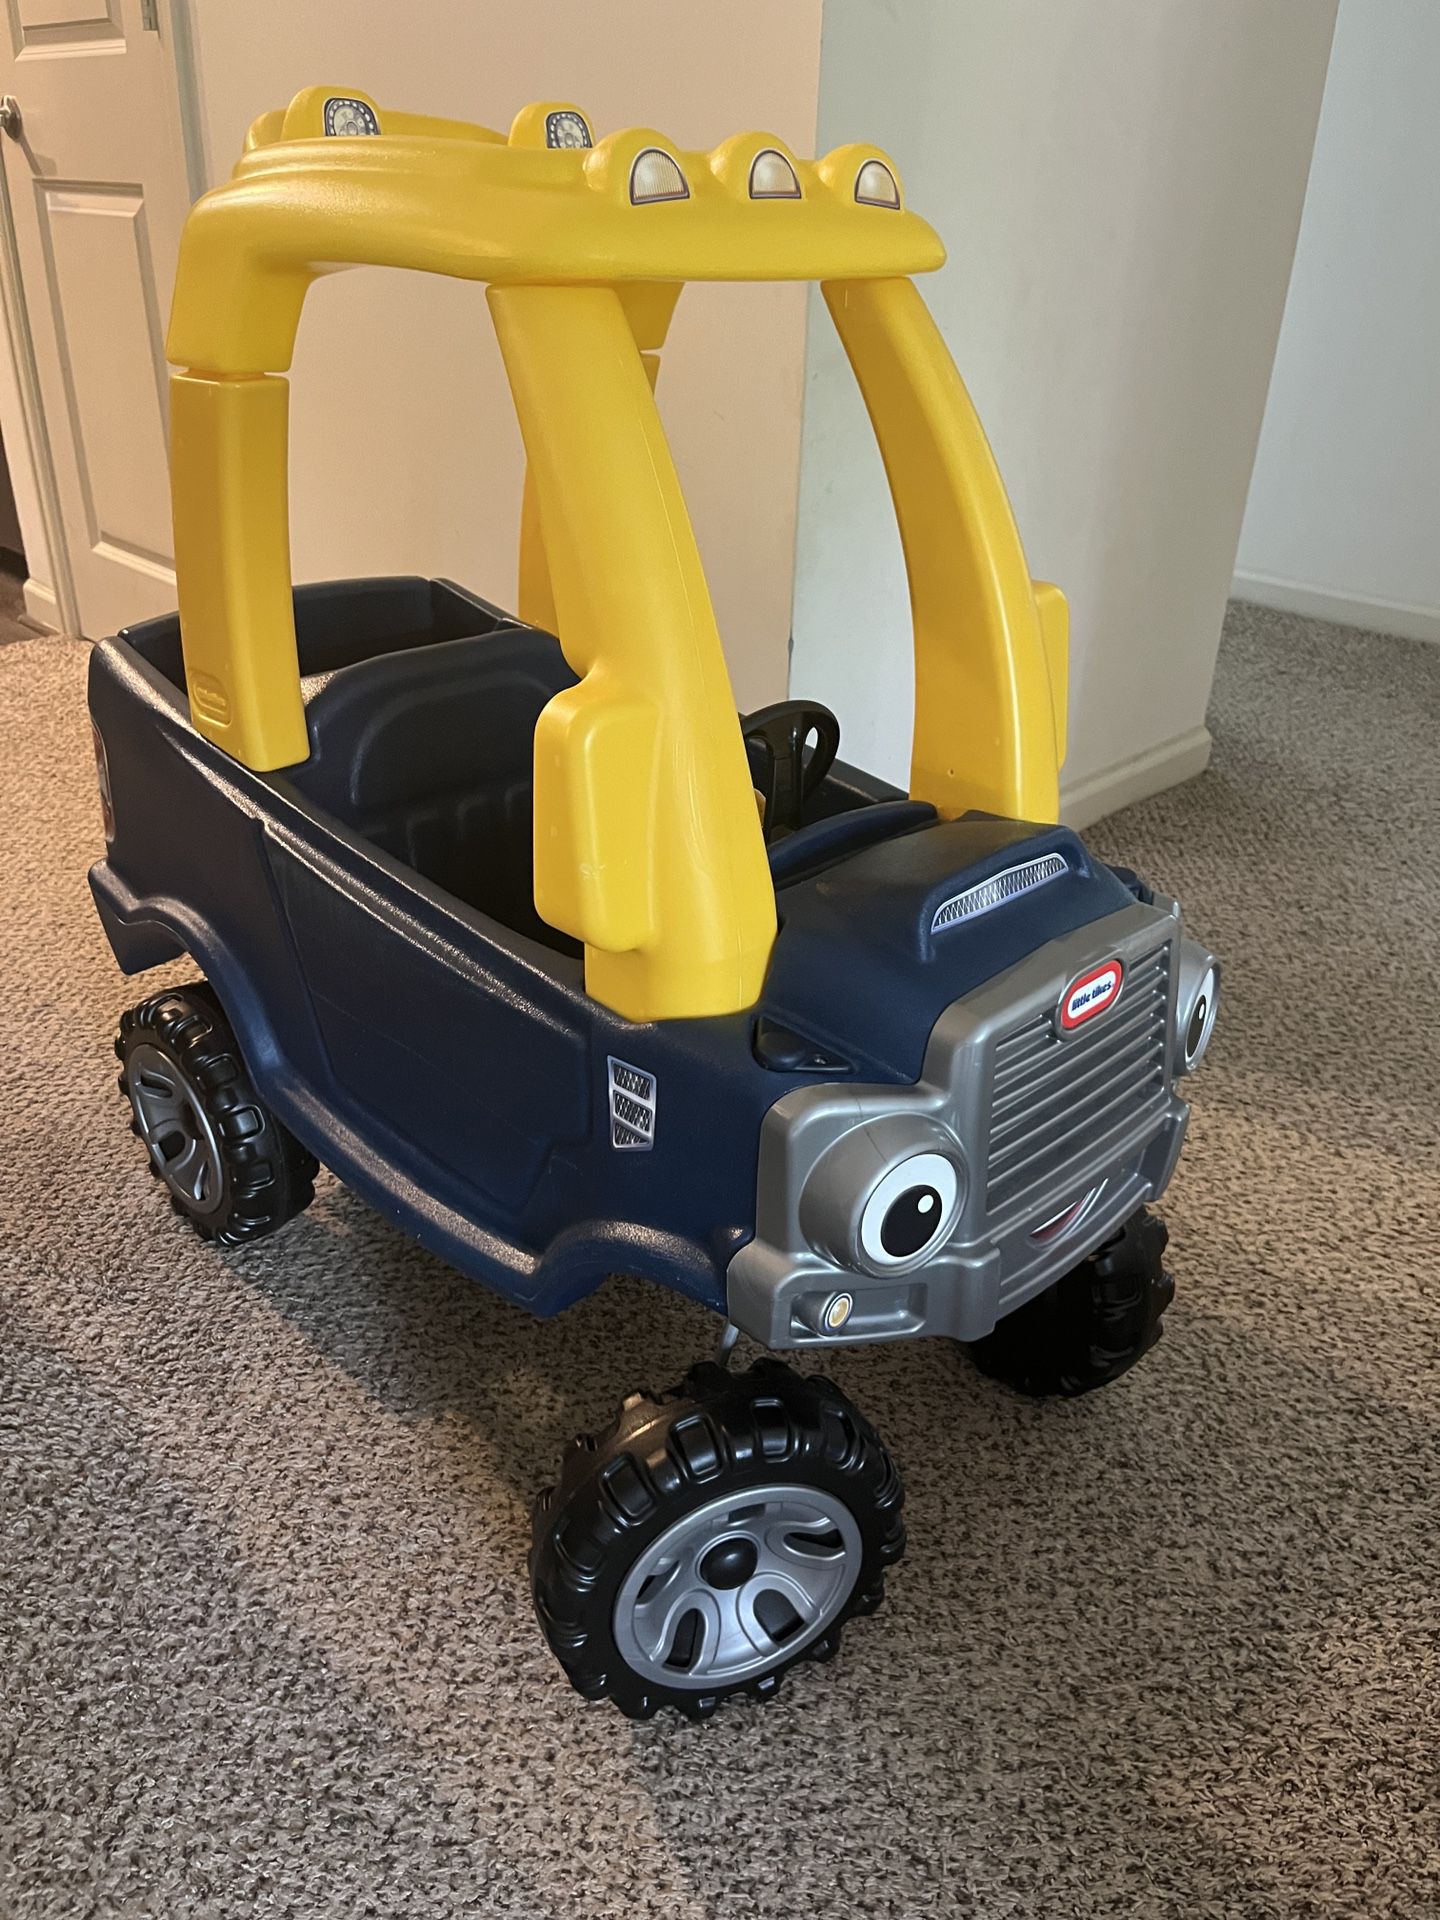 Little Tikes Truck Toy Car